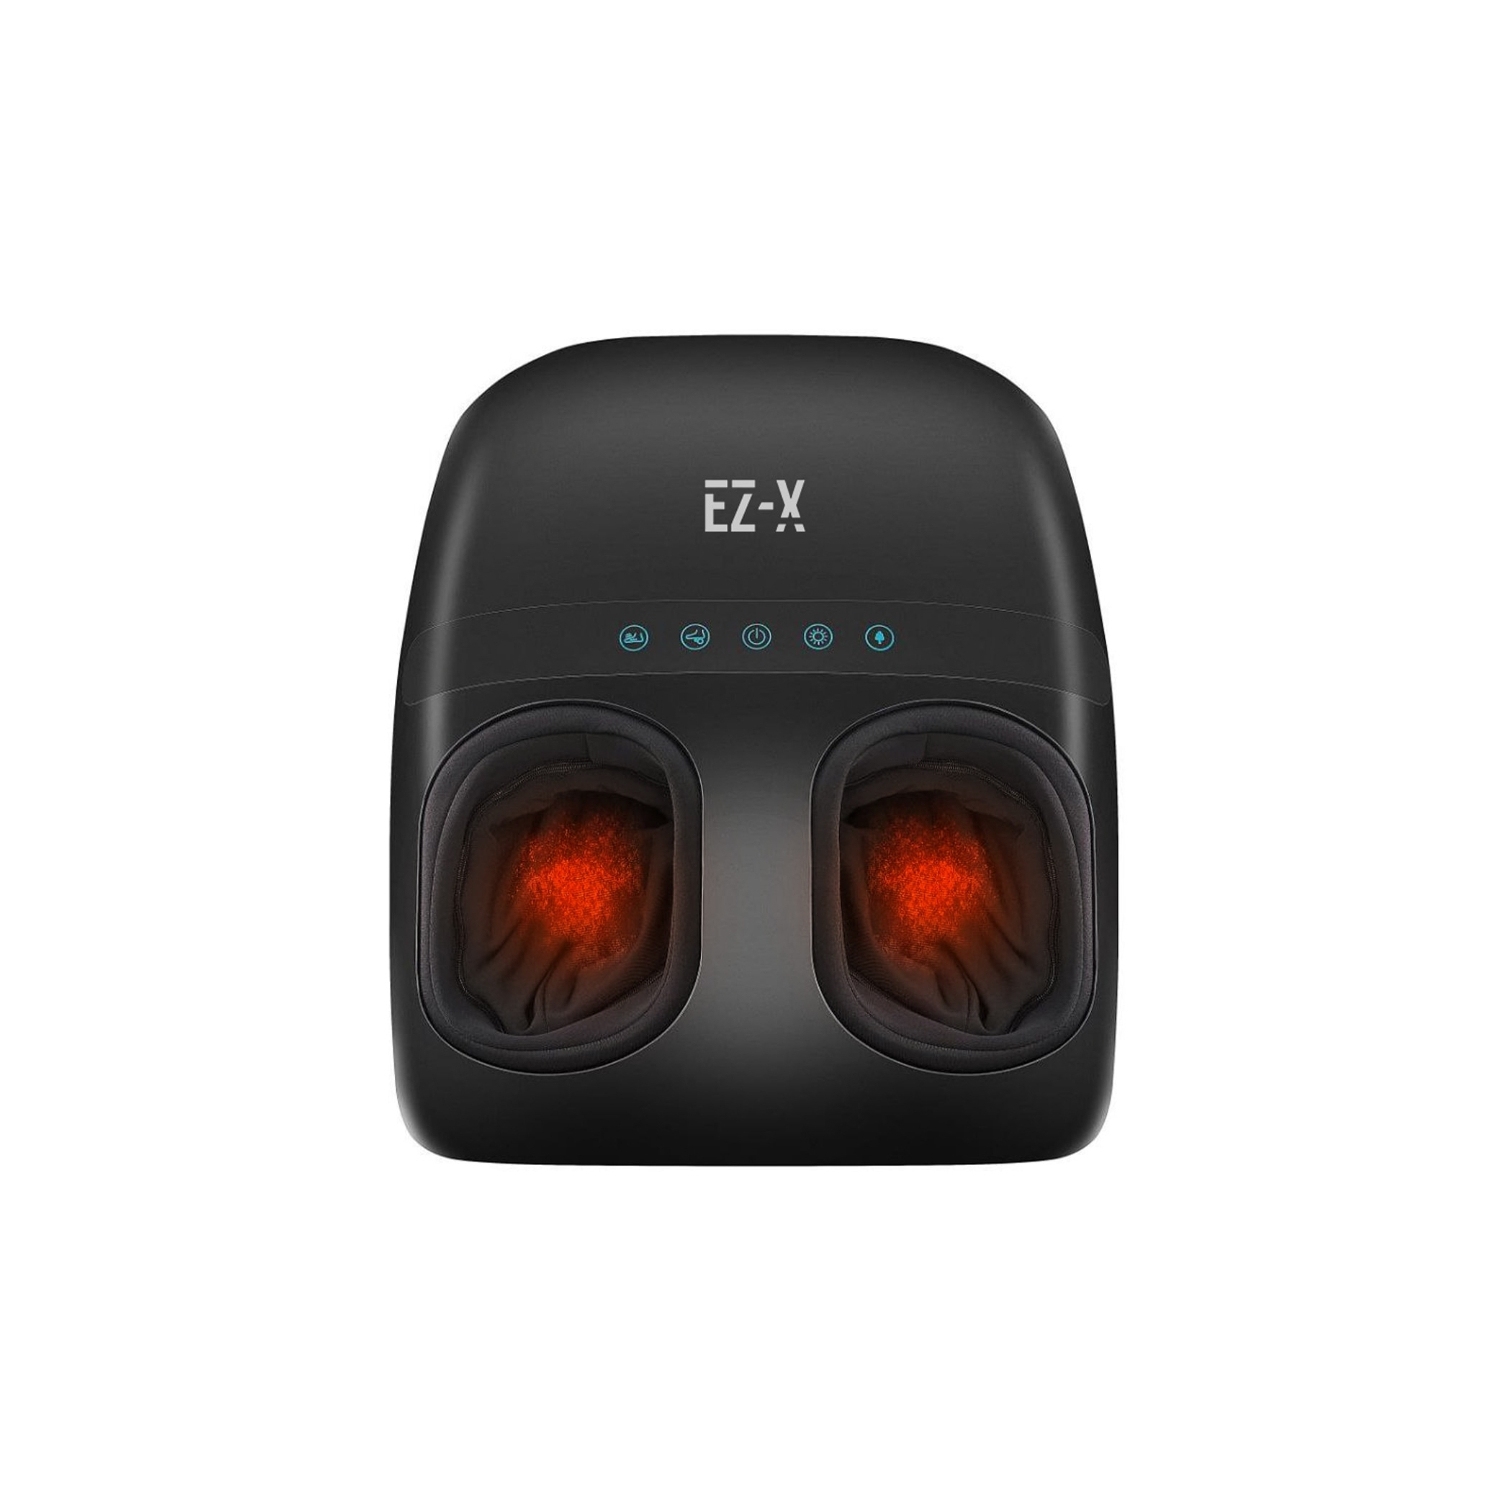 EZ-X Premium Foot Massager Machine with Heat and Air Compression - Deep Kneading Shiatsu Foot Massage - Whole Foot and Heel Therapy